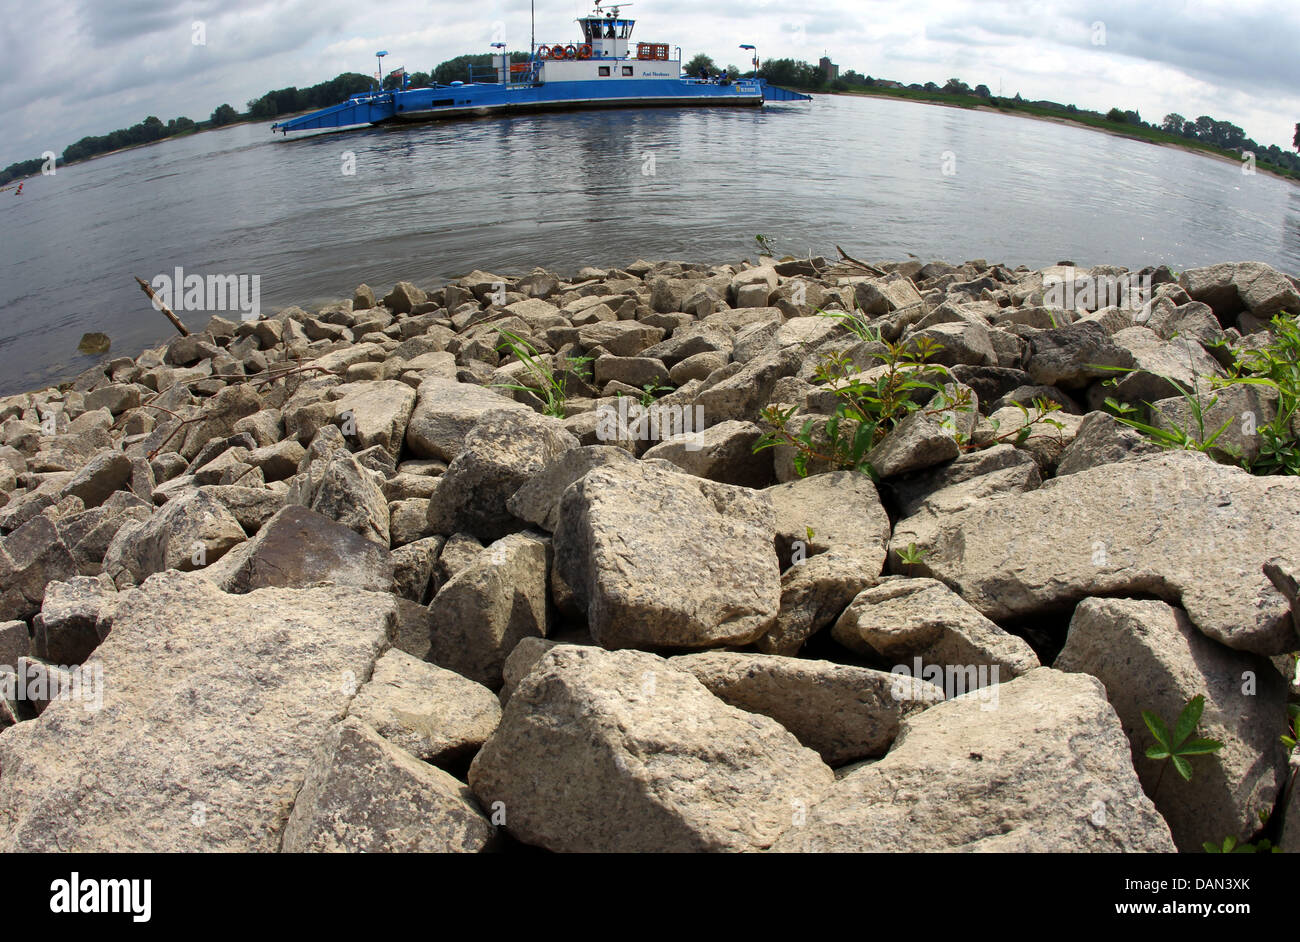 The ferryboat 'Amt Neuhaus' heads towards a landing pier while rocks of the riverside are visible in the forefront in Neu Blecke, Germany, 05 July 2011. The water level of the Elbe river has decreased in the last weeks, due to a recent drought. Waterway transport is yet not affected. Photo: Jens Buettner Stock Photo